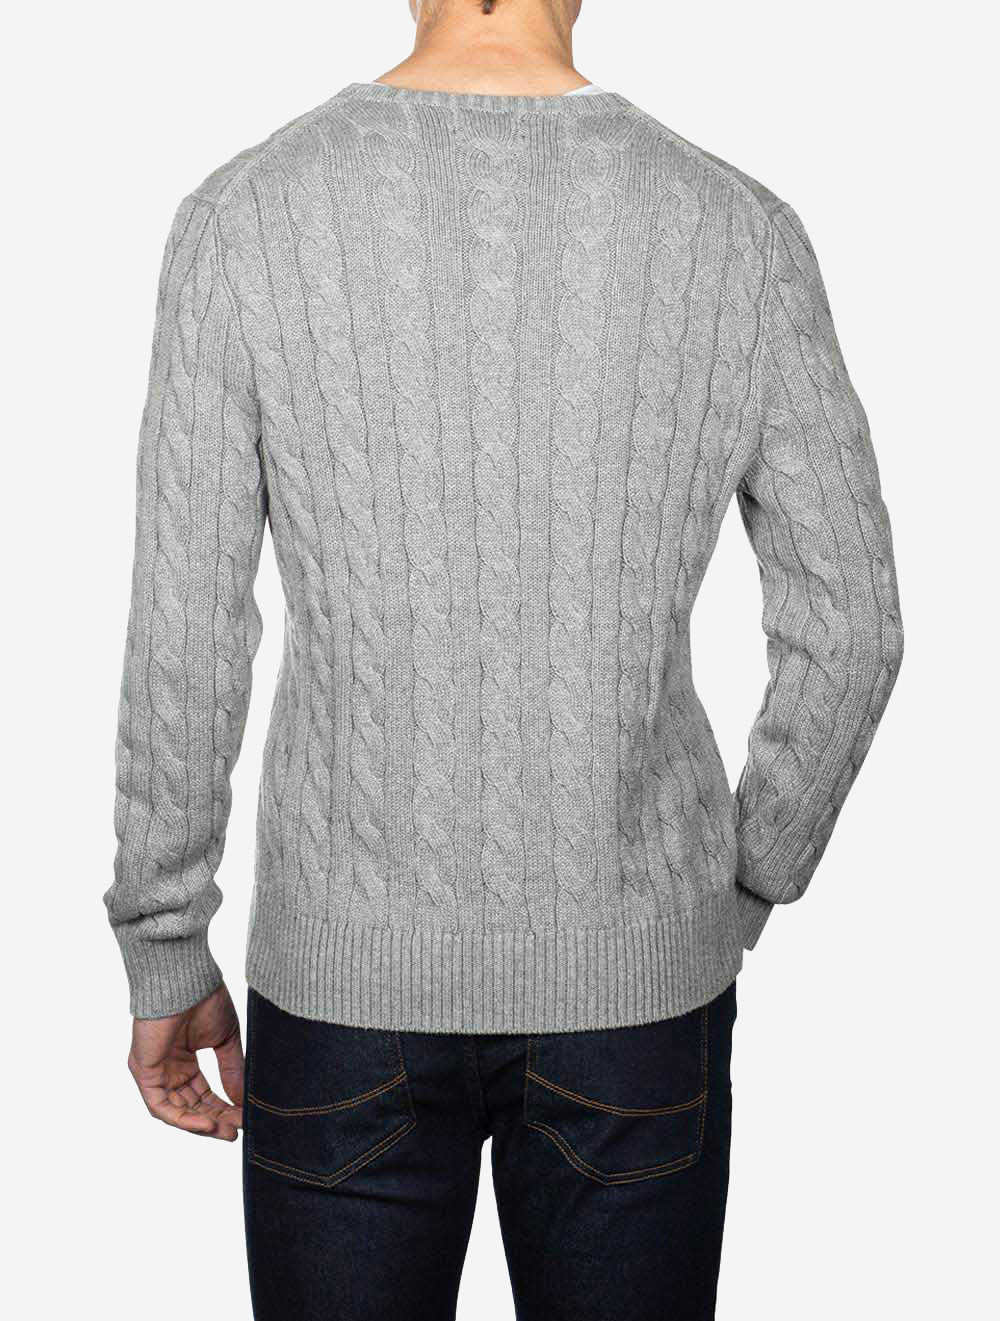 Cotton Cable Sweater Grey